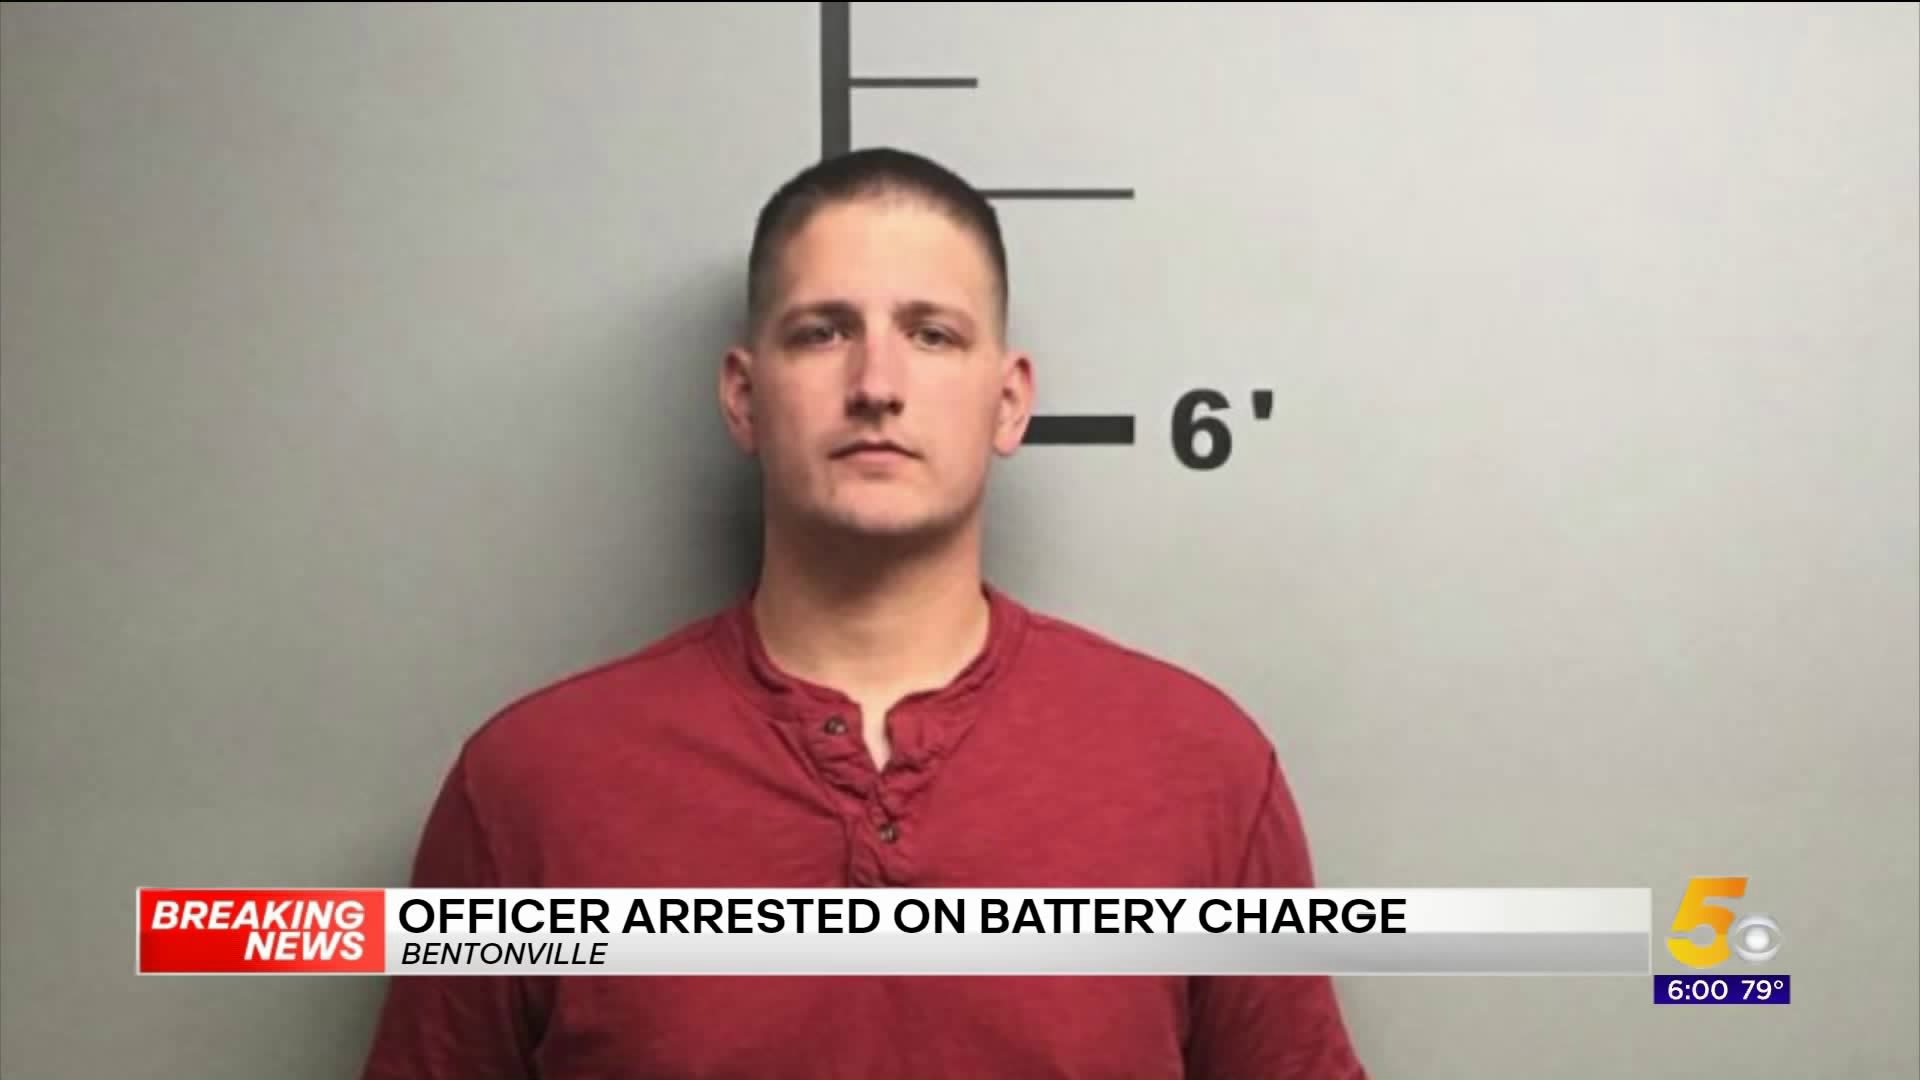 Bentonville Police Officer Placed On Administrative Leave After Battery Charge